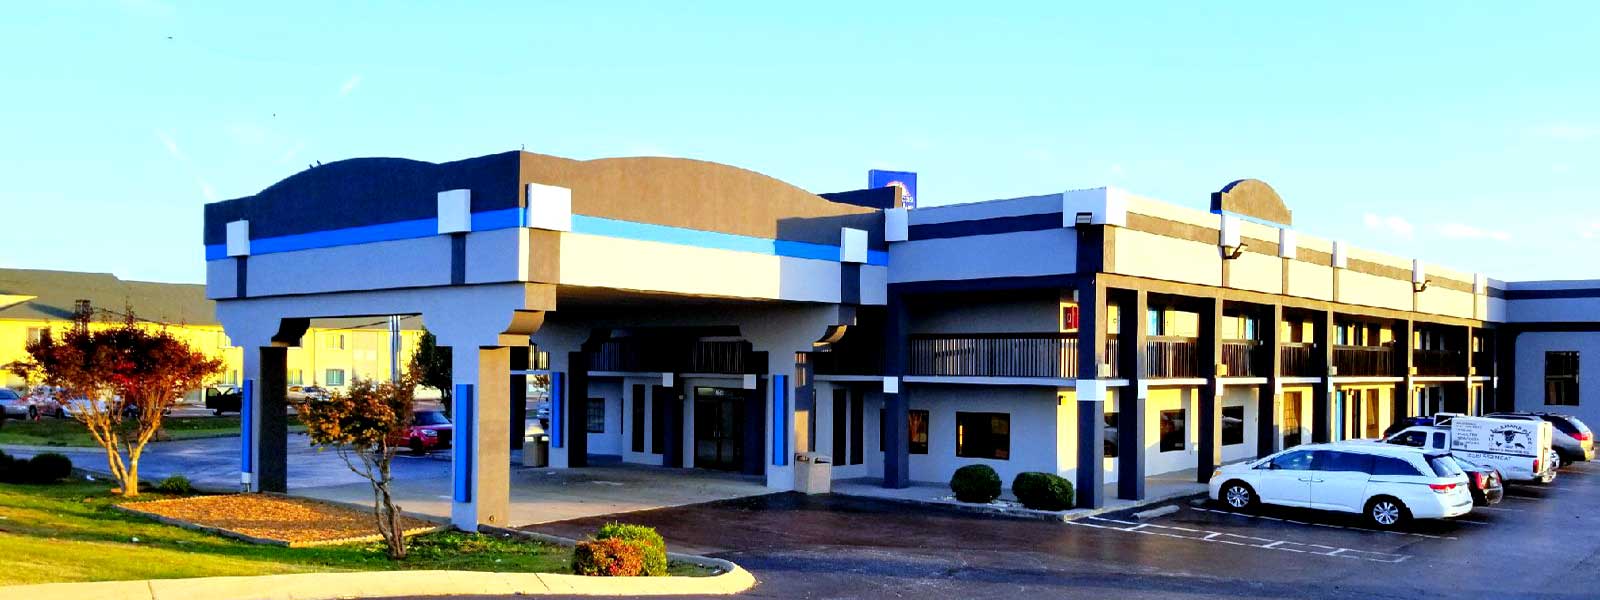 Clean Comfortable Rooms Lodging Hotels Motels in Clarksville Tennessee